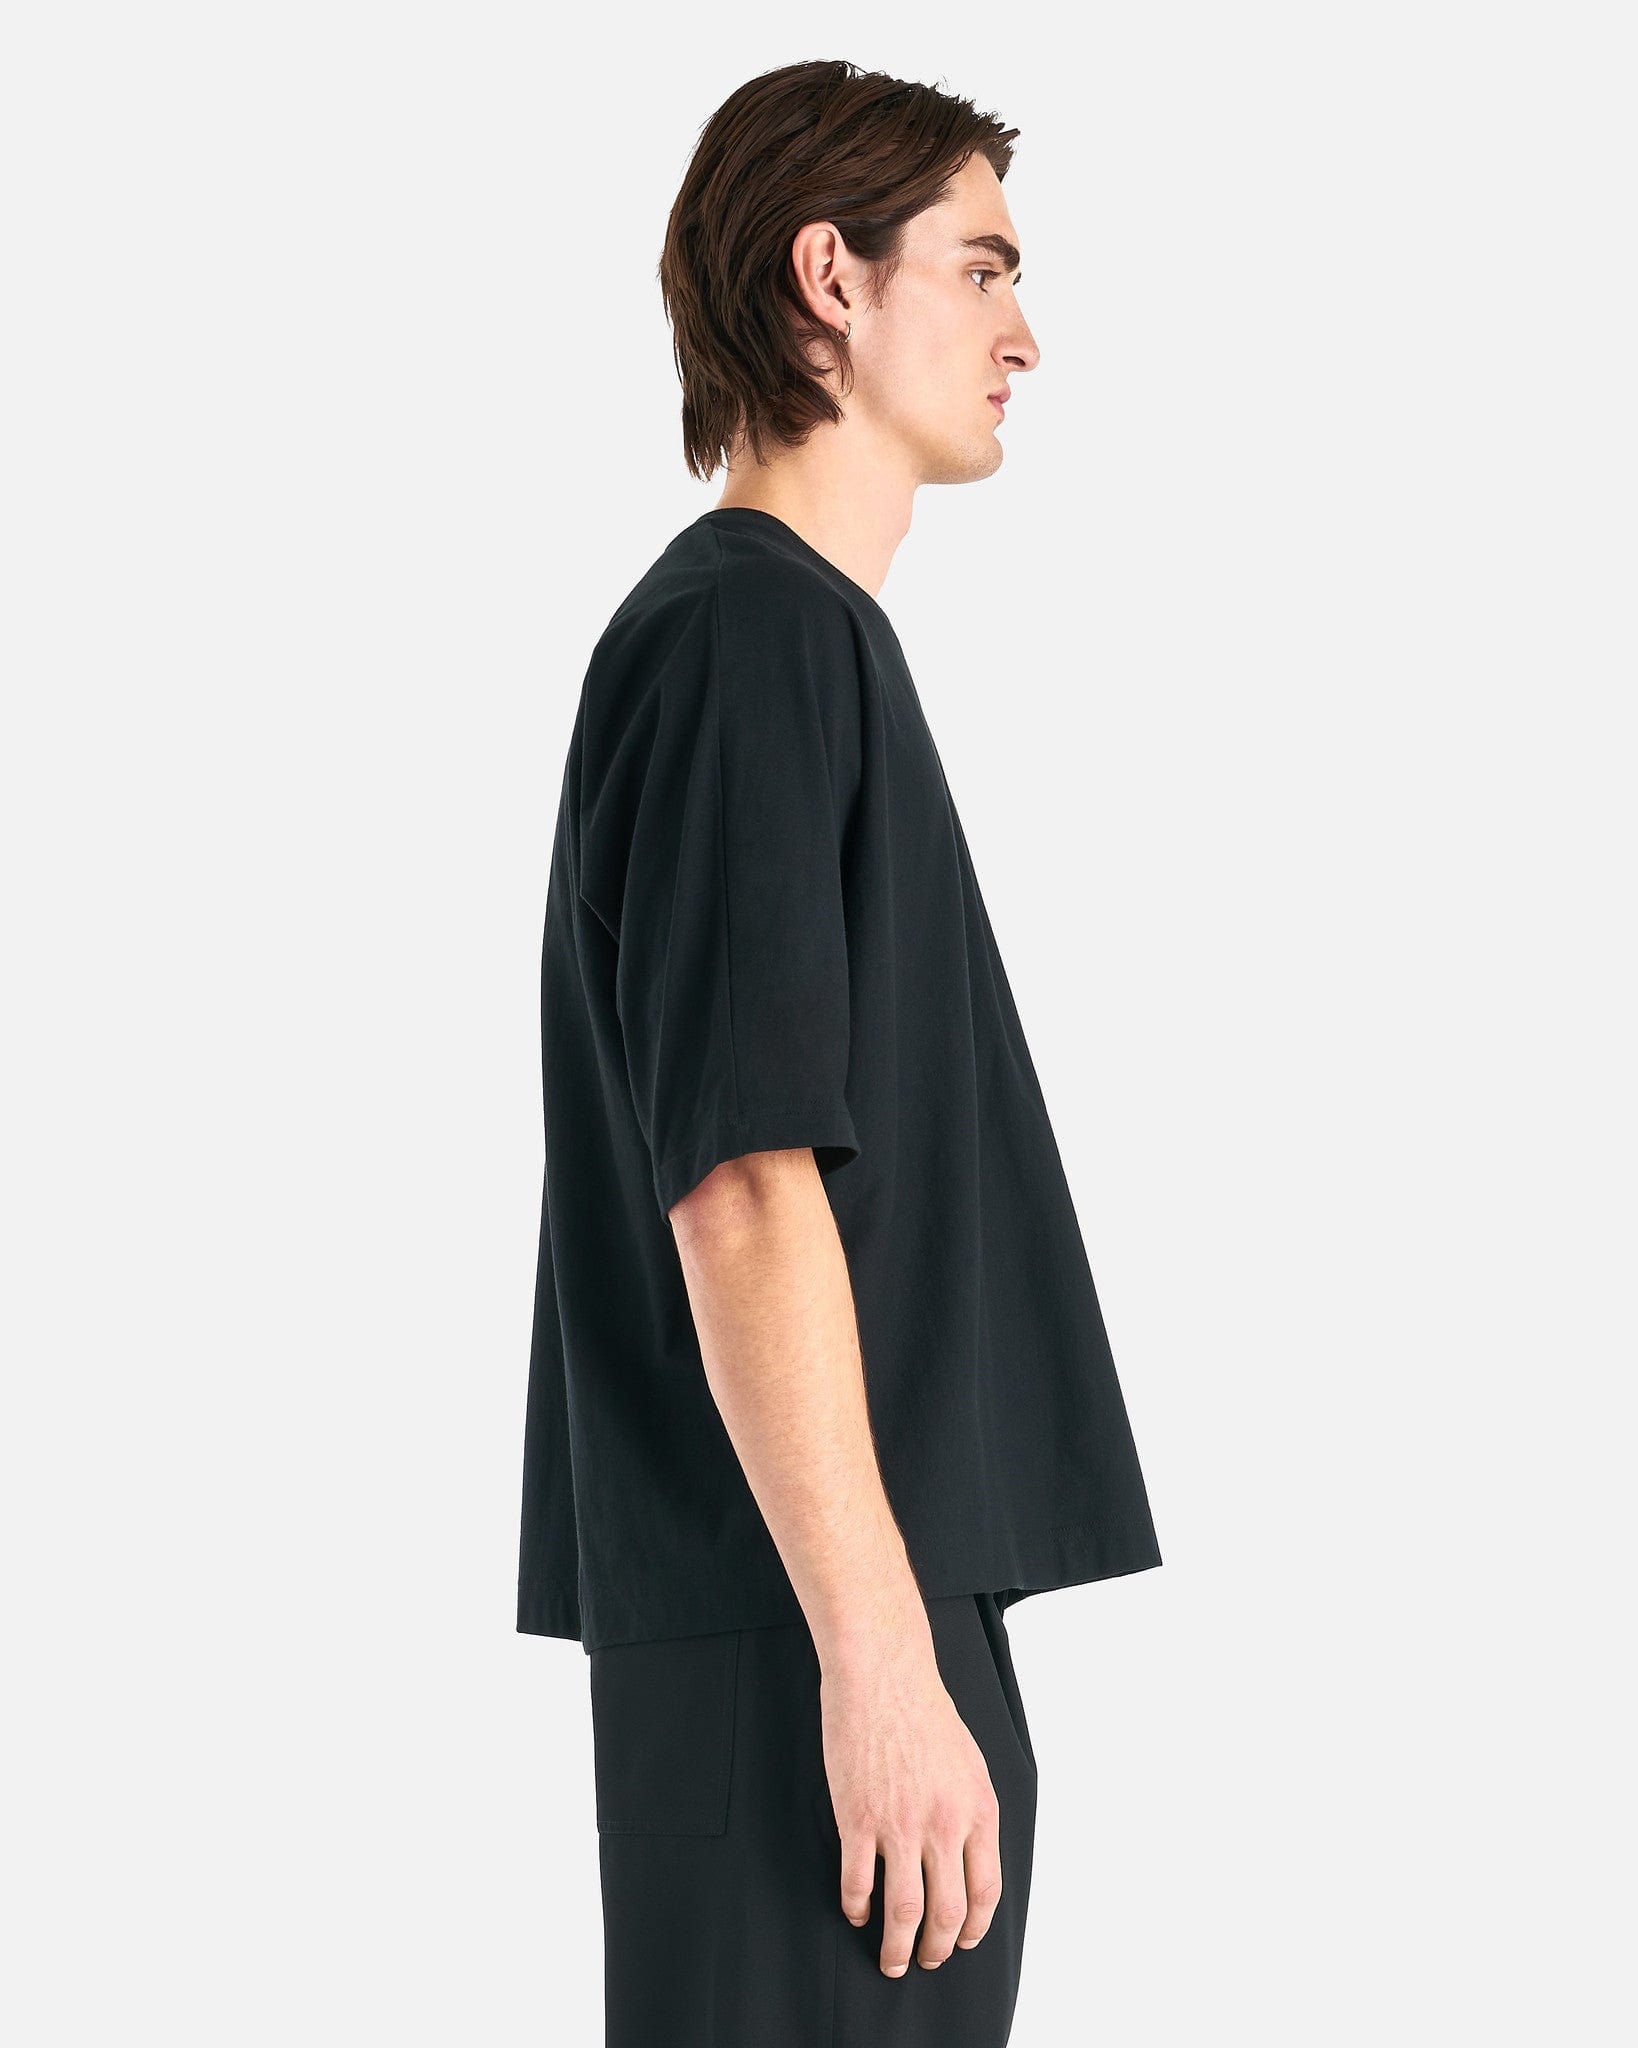 Homme Plissé Issey Miyake Men's T-Shirts Release-T Basic in Black